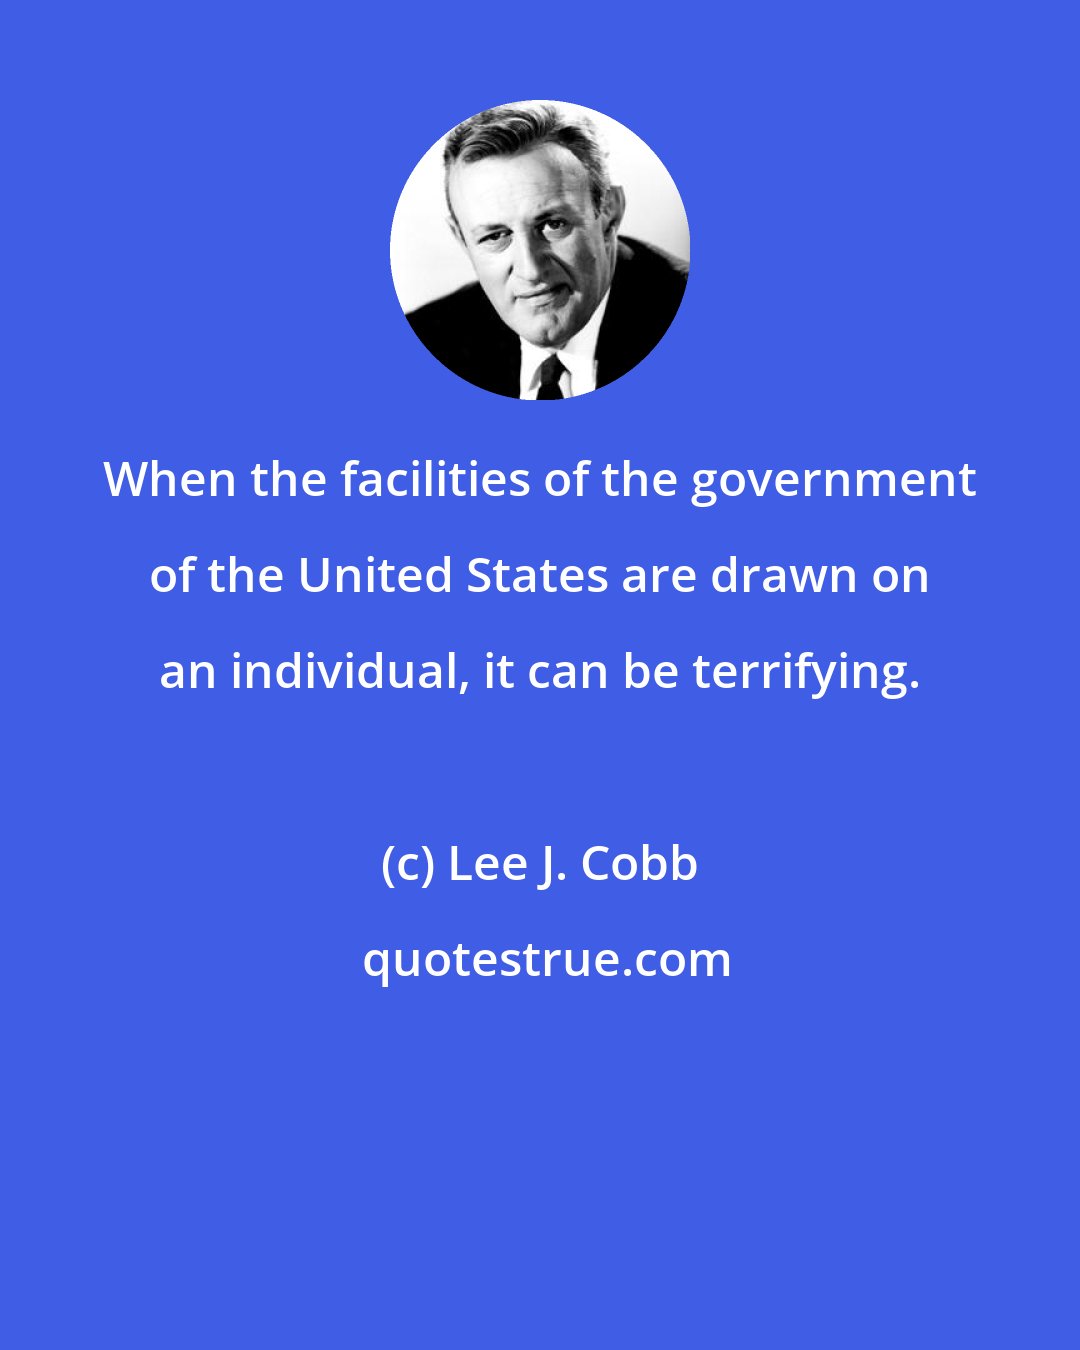 Lee J. Cobb: When the facilities of the government of the United States are drawn on an individual, it can be terrifying.